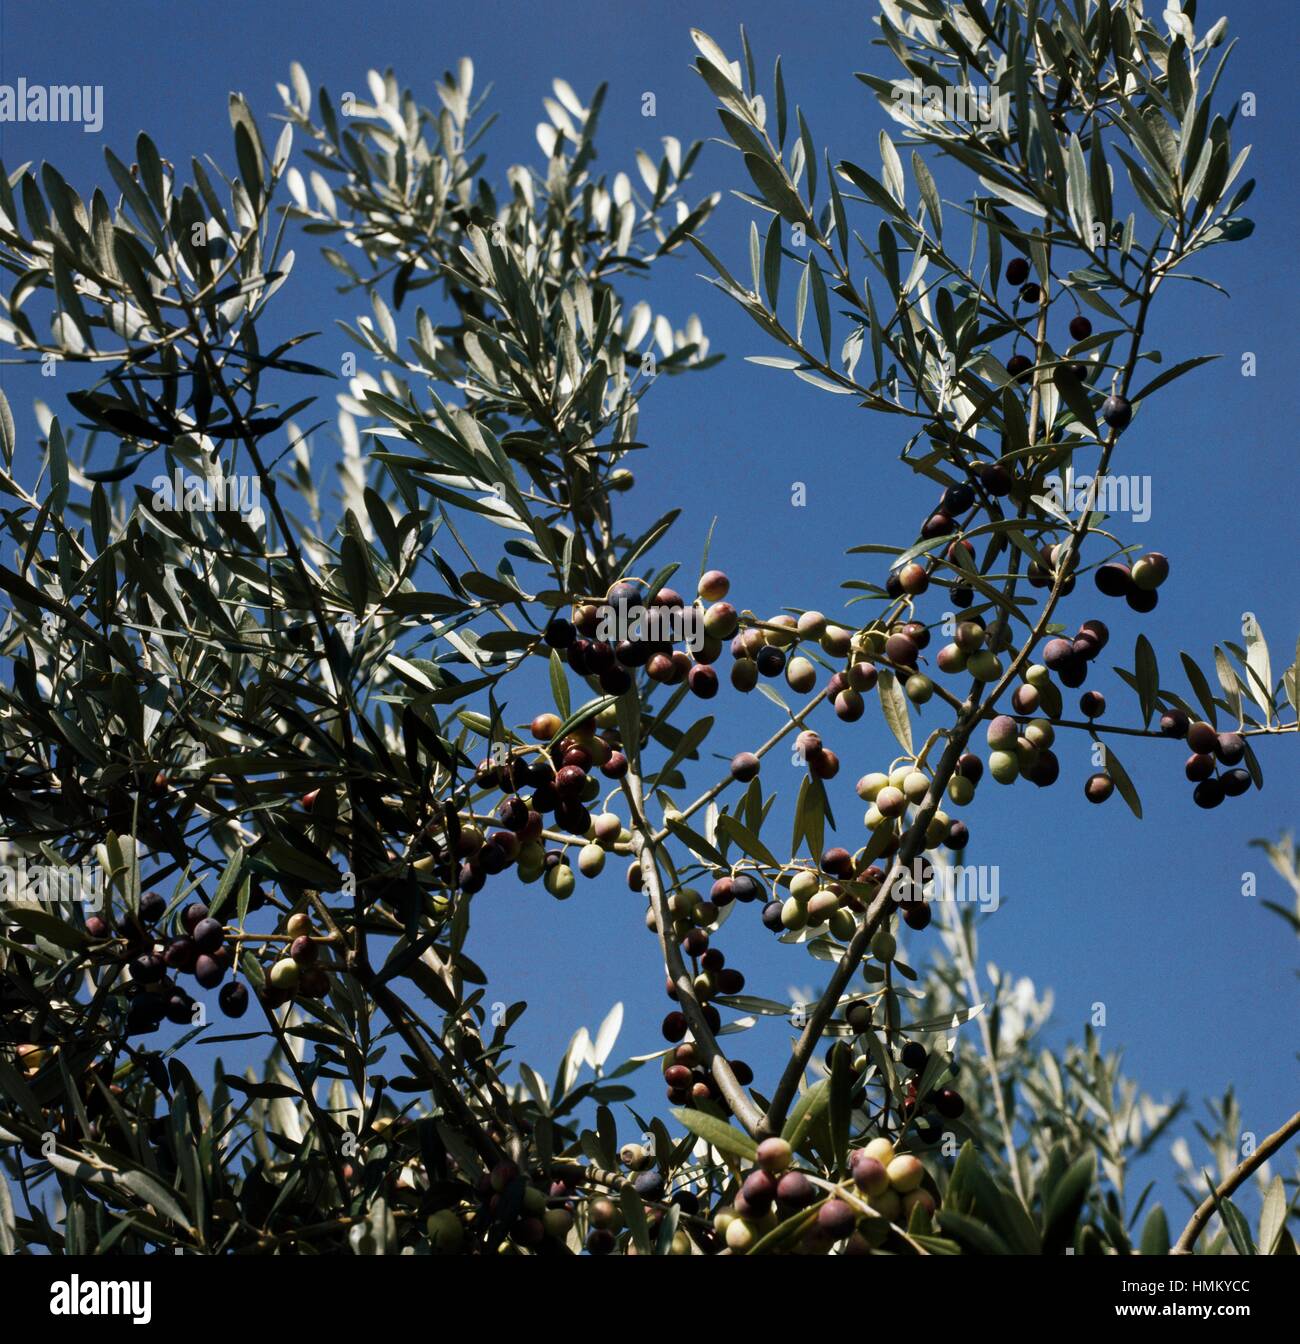 Olive branches with olives (Olea europaea), Oleaceae. Stock Photo